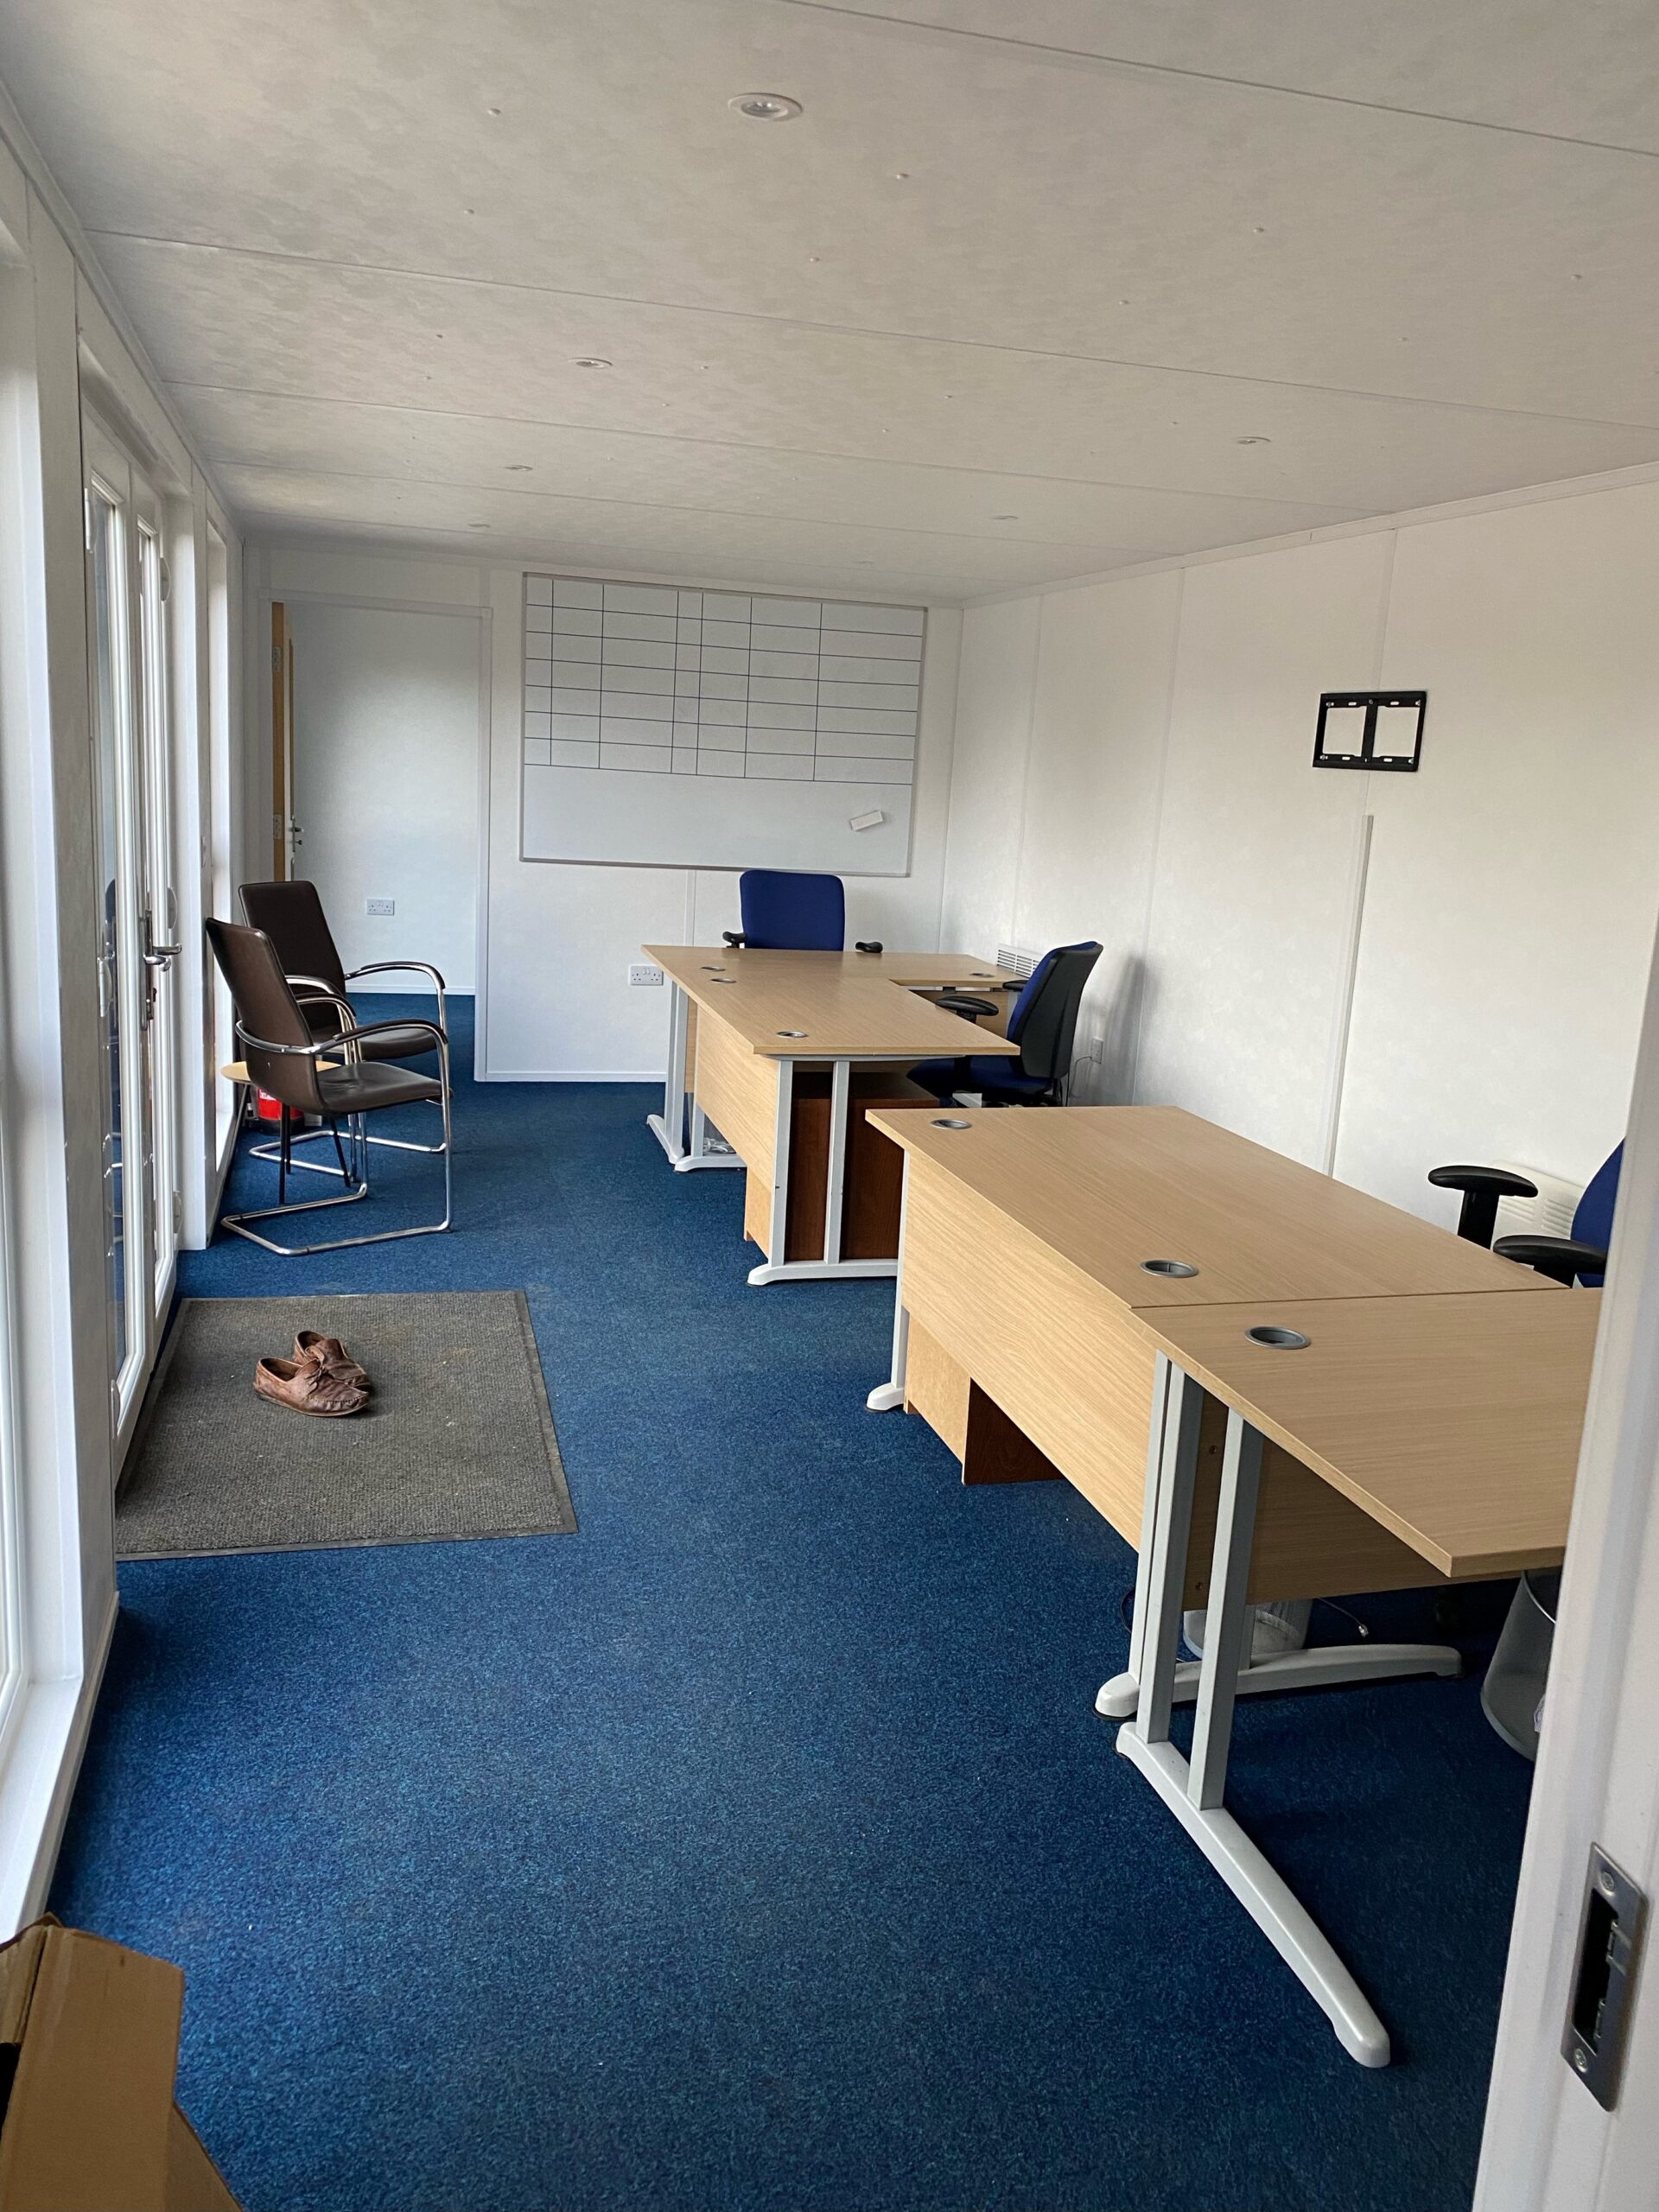 Office With Yard and Container to Let in Tiptree, Near Maldon, Essex